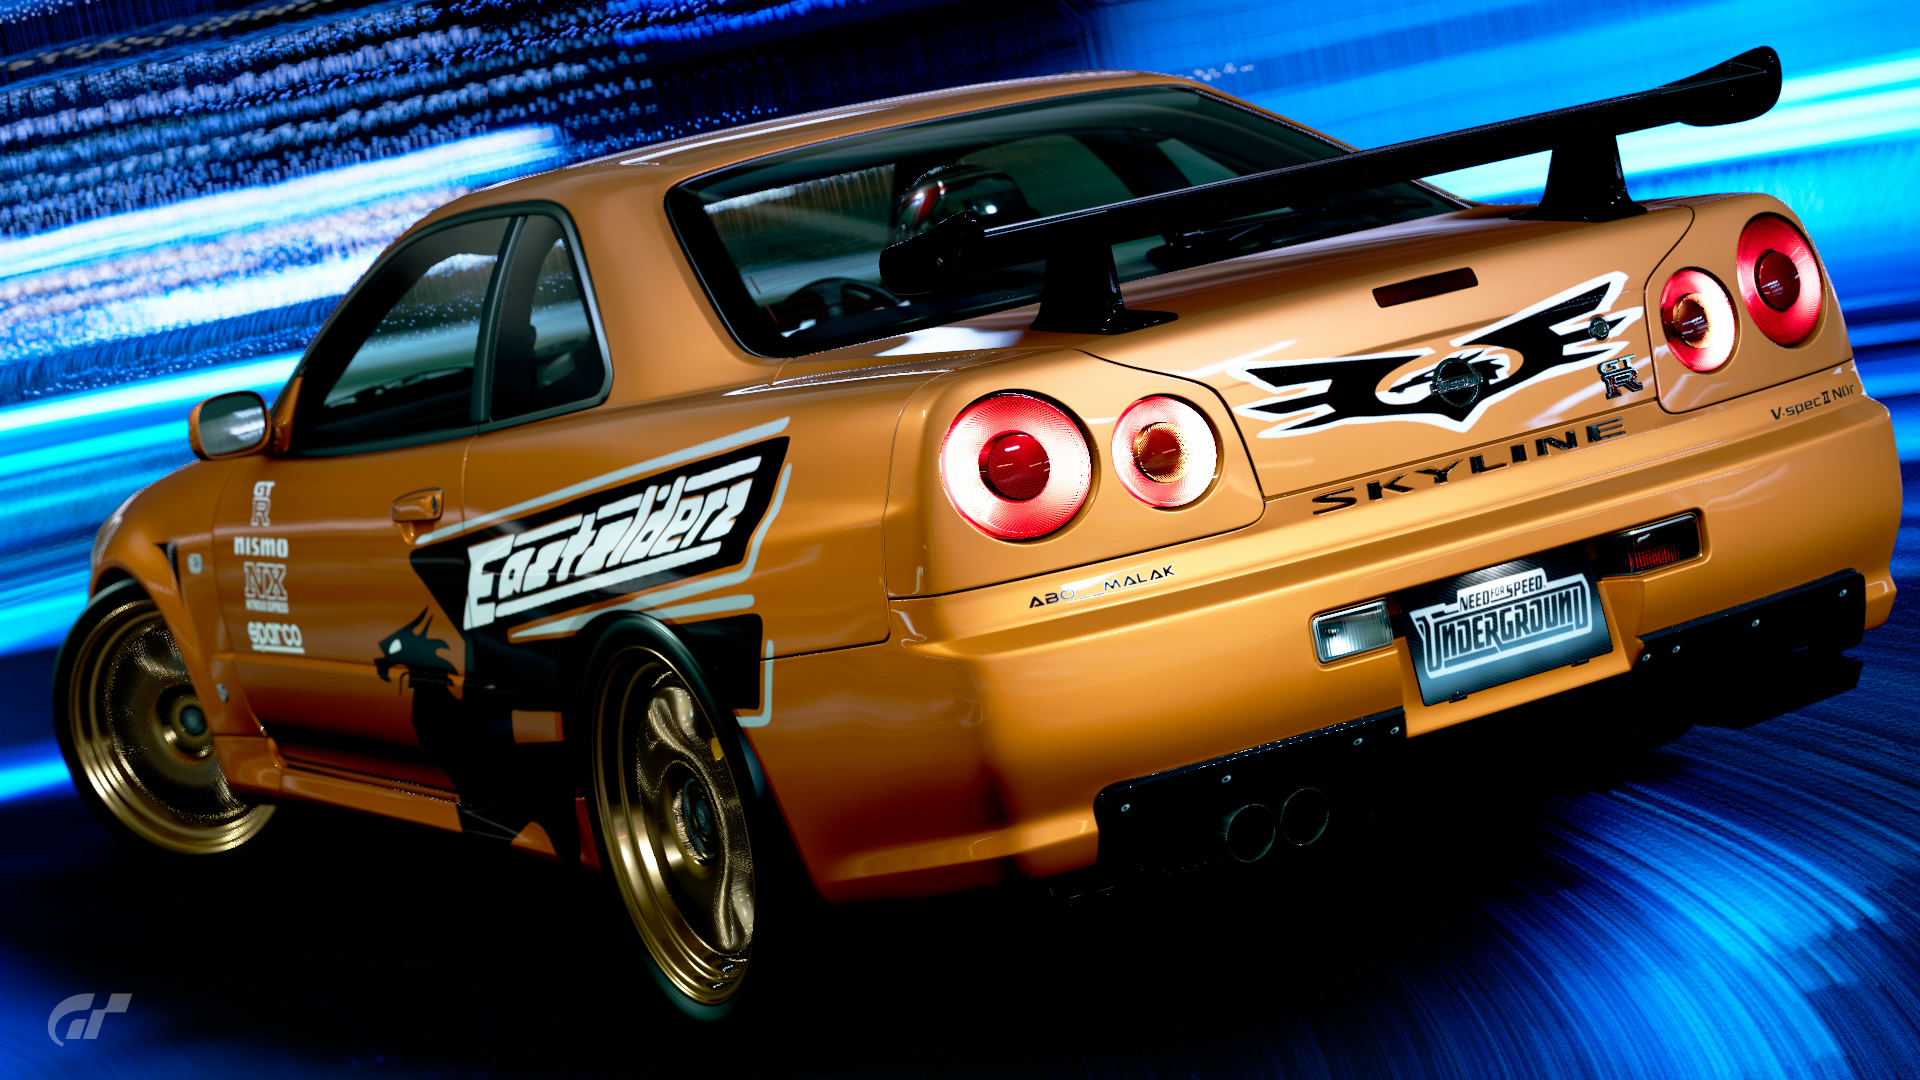 High quality nissan skyline r34 inspired art prints by independent artists ...